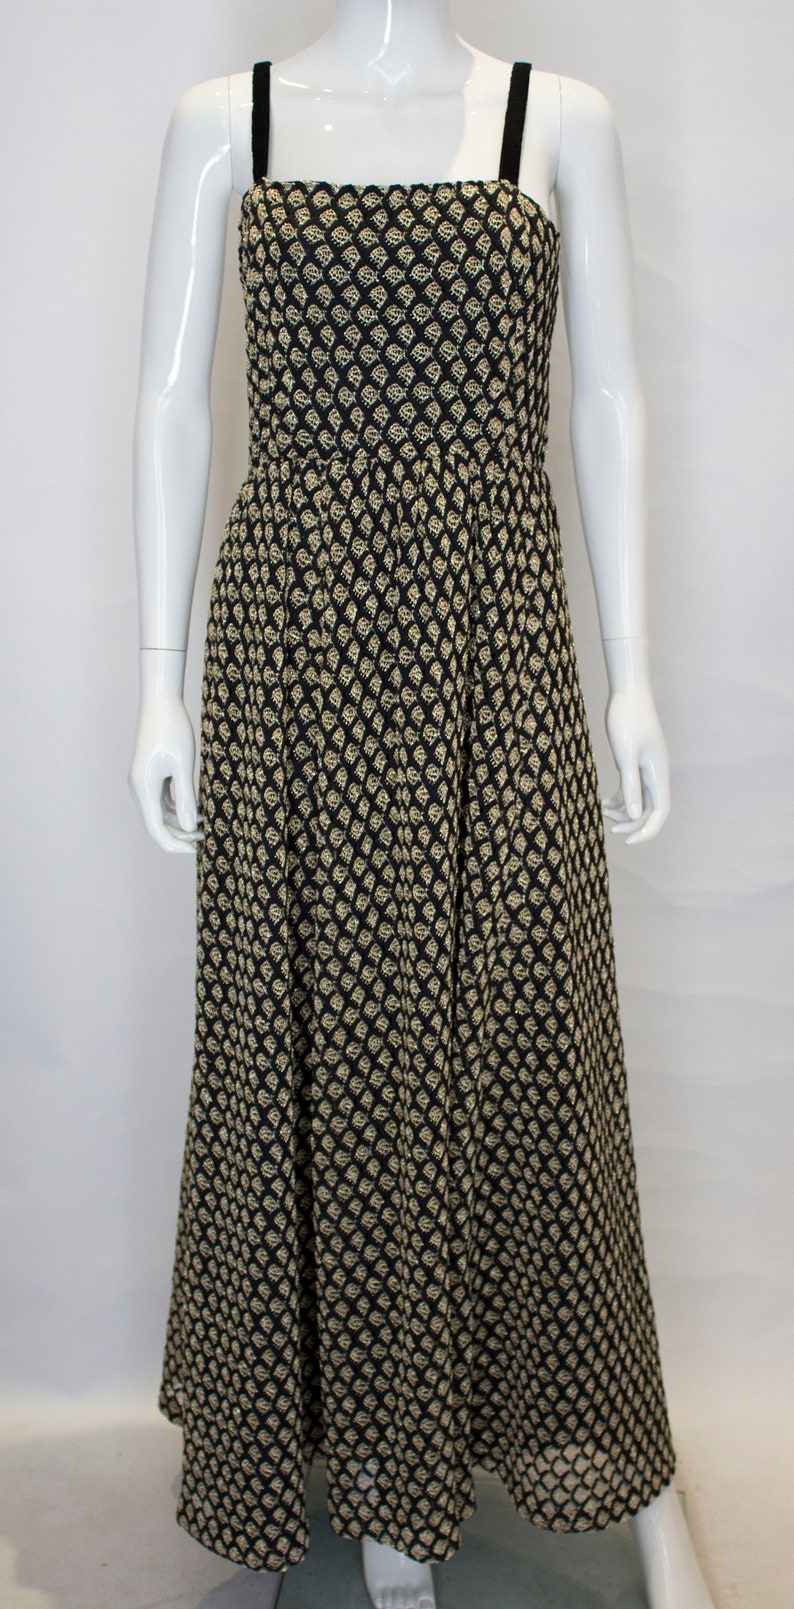 A Vintage 1960s 1970s Black and Gold Full Length Party Dress - Etsy